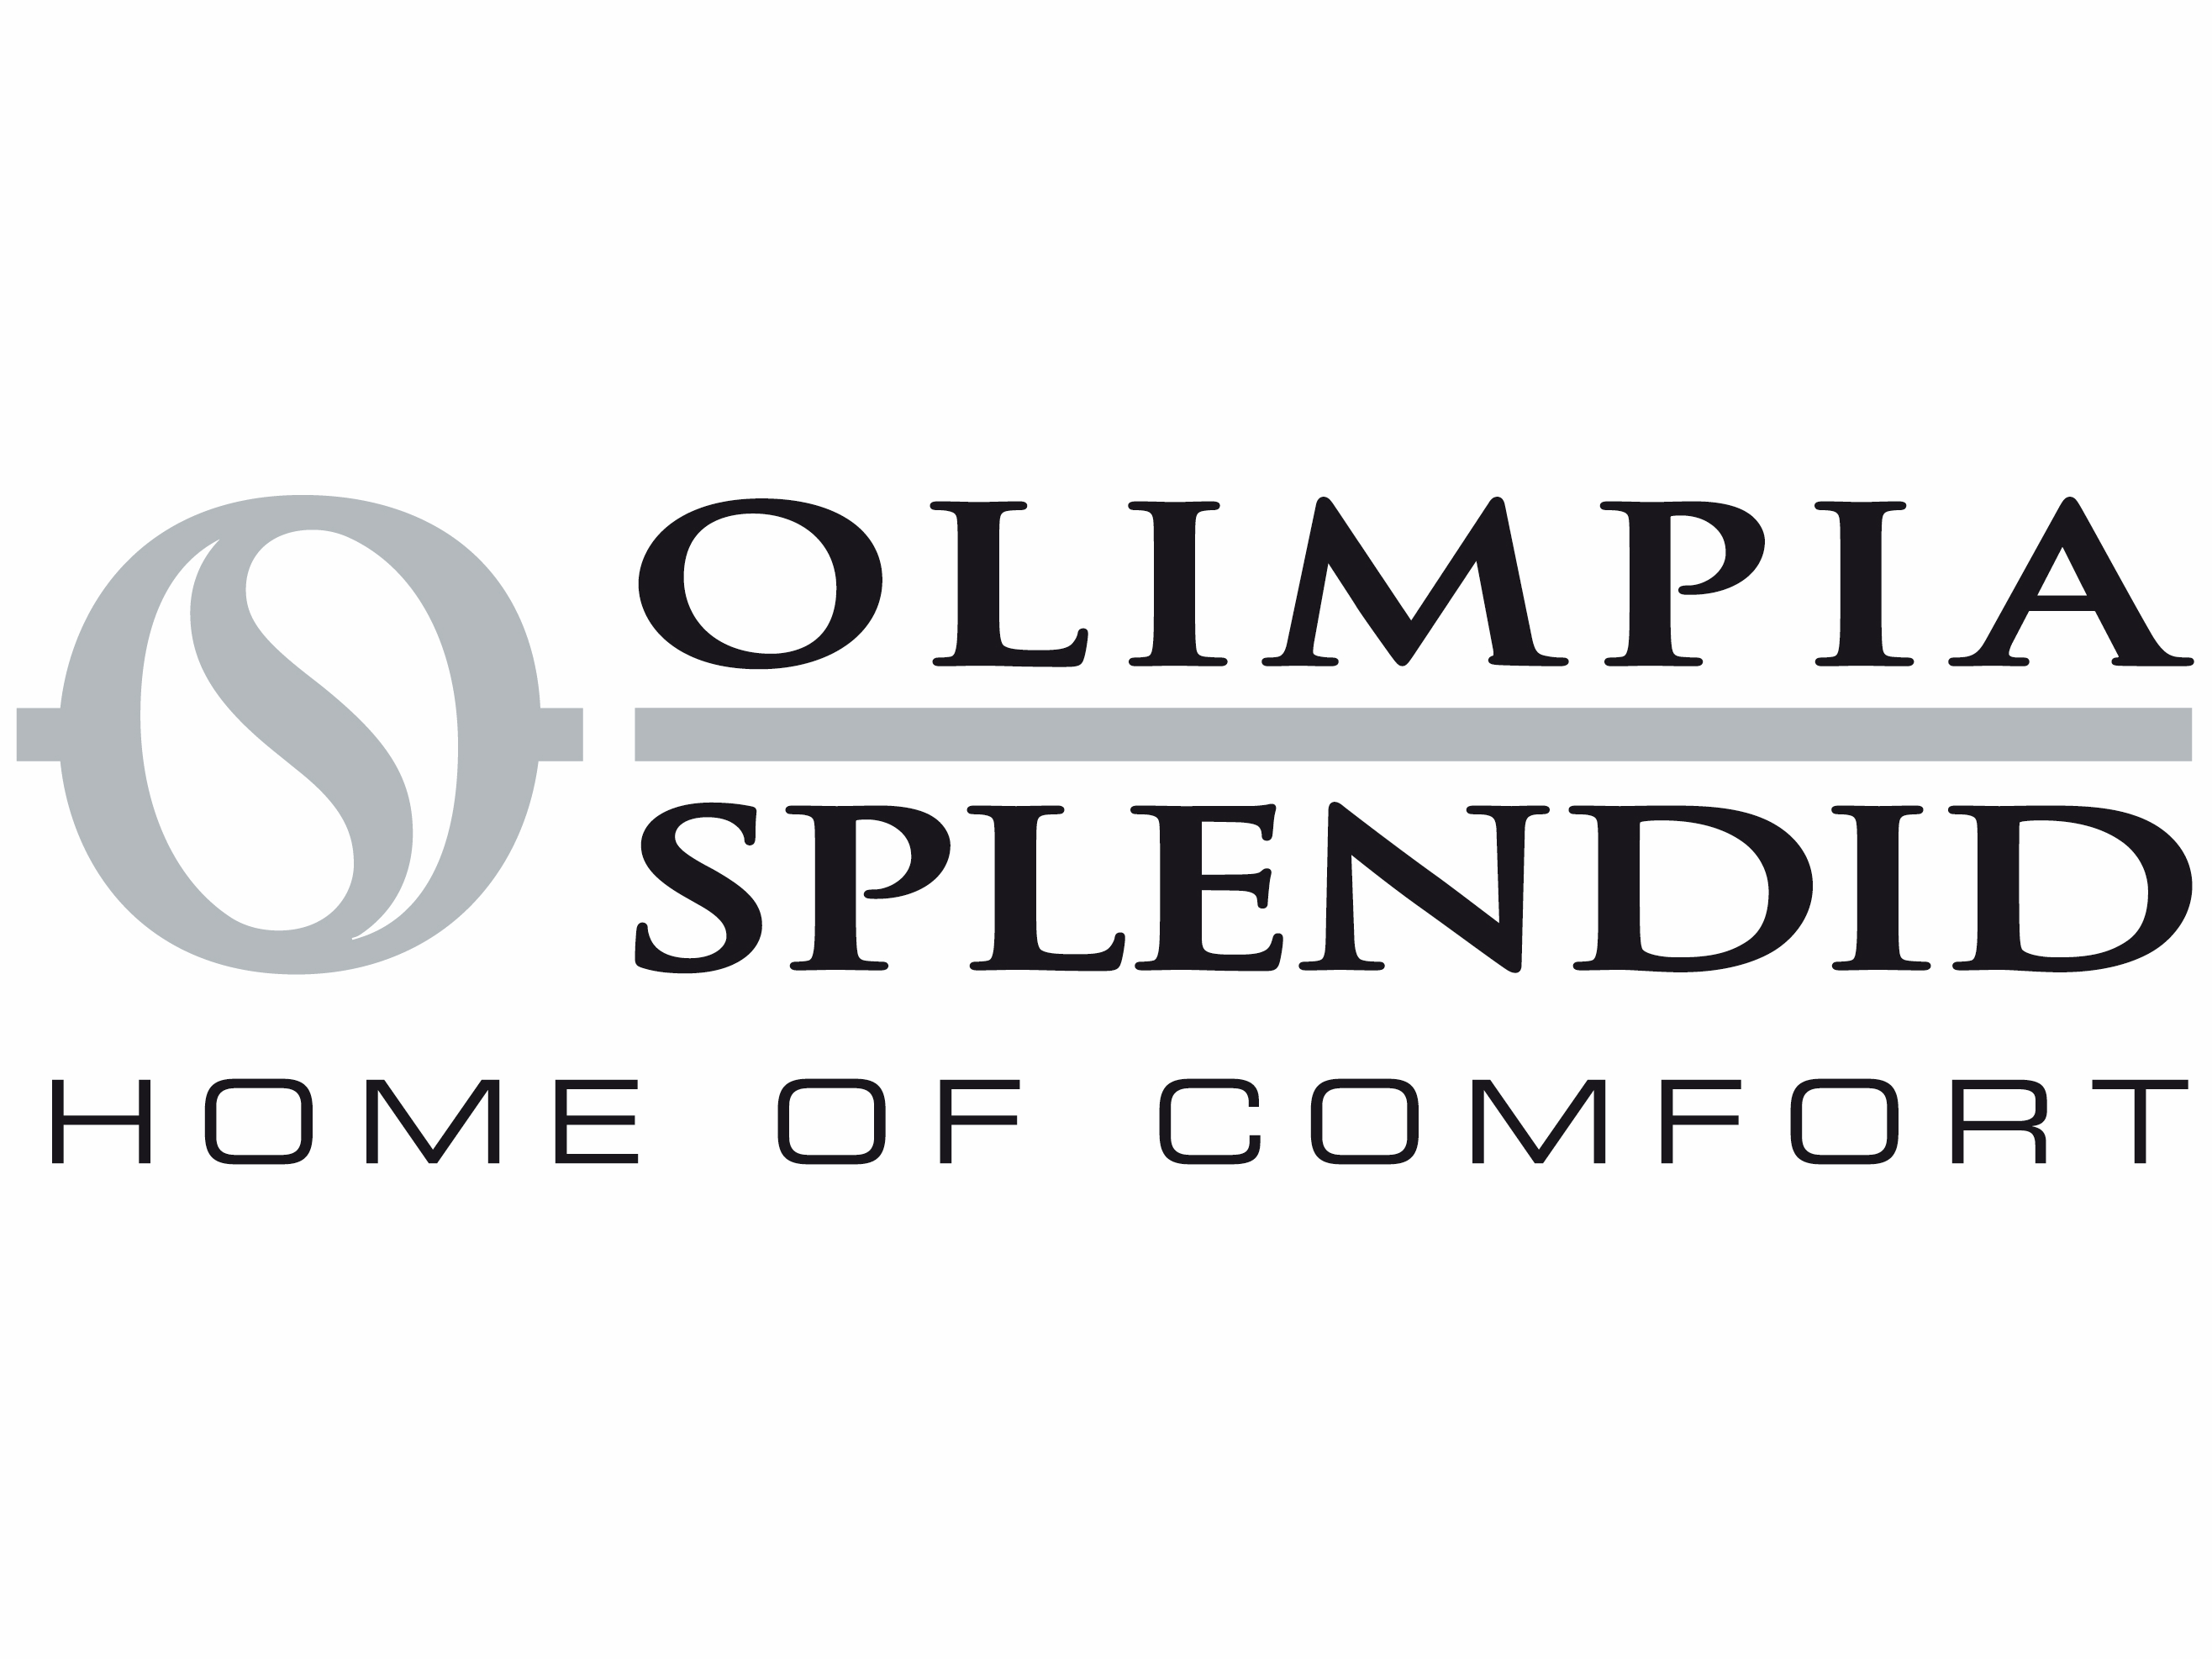 Splendid Logo - OLIMPIA SPLENDID | Heating and air-conditioning systems | Archiproducts